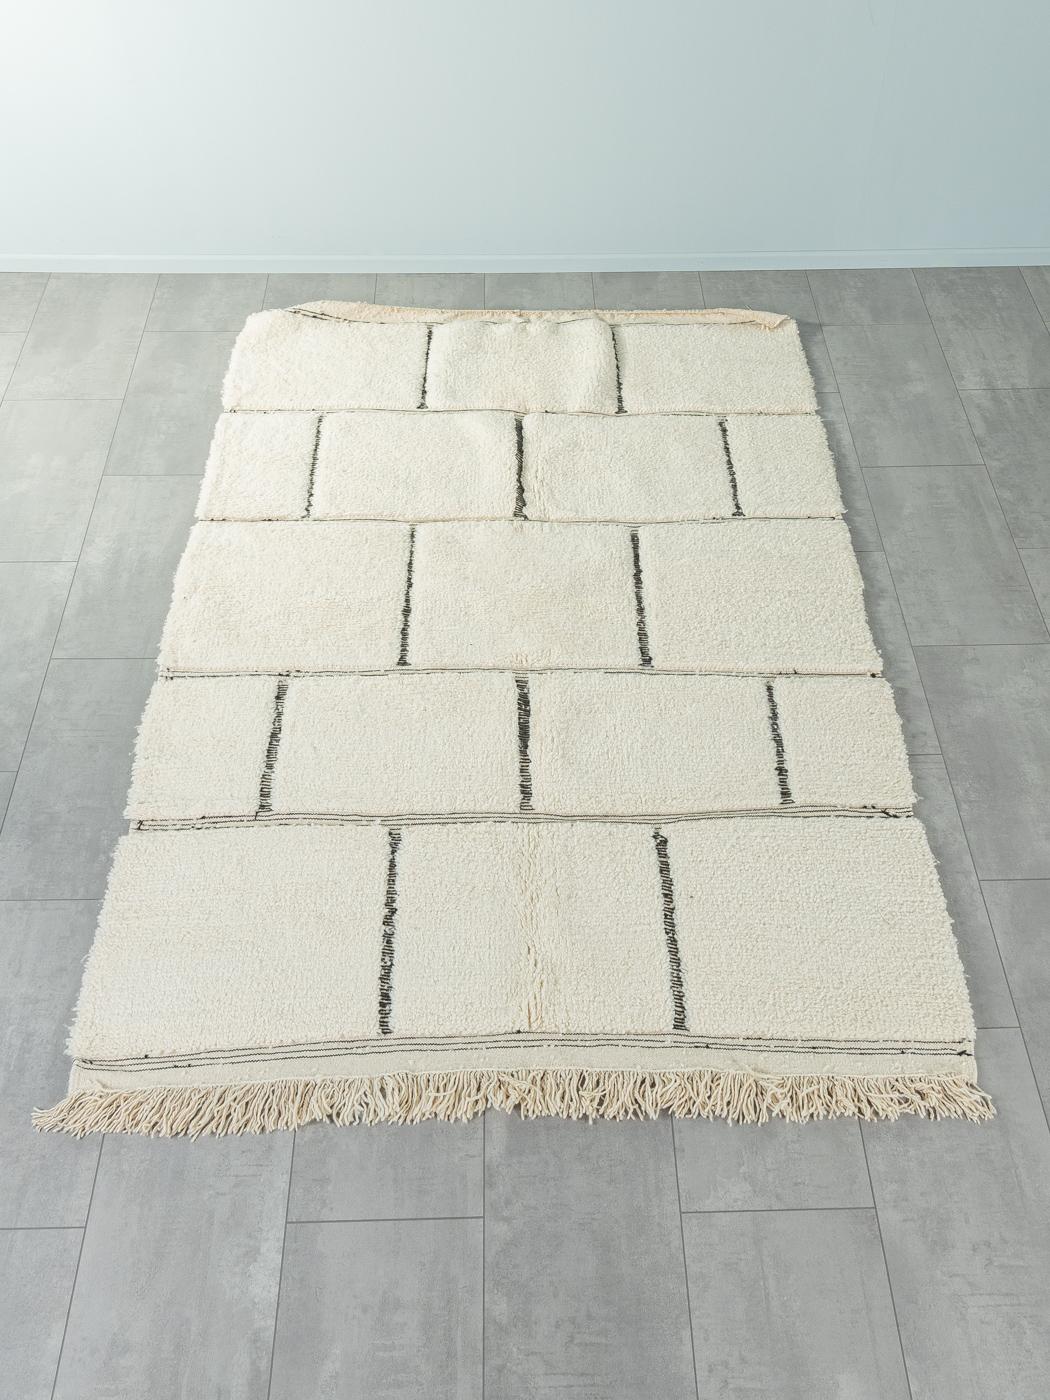 Constancy is a contemporary 100% wool rug – thick and soft, comfortable underfoot. Our Berber rugs are handwoven and handknotted by Amazigh women in the Atlas Mountains. These communities have been crafting rugs for thousands of years. One knot at a